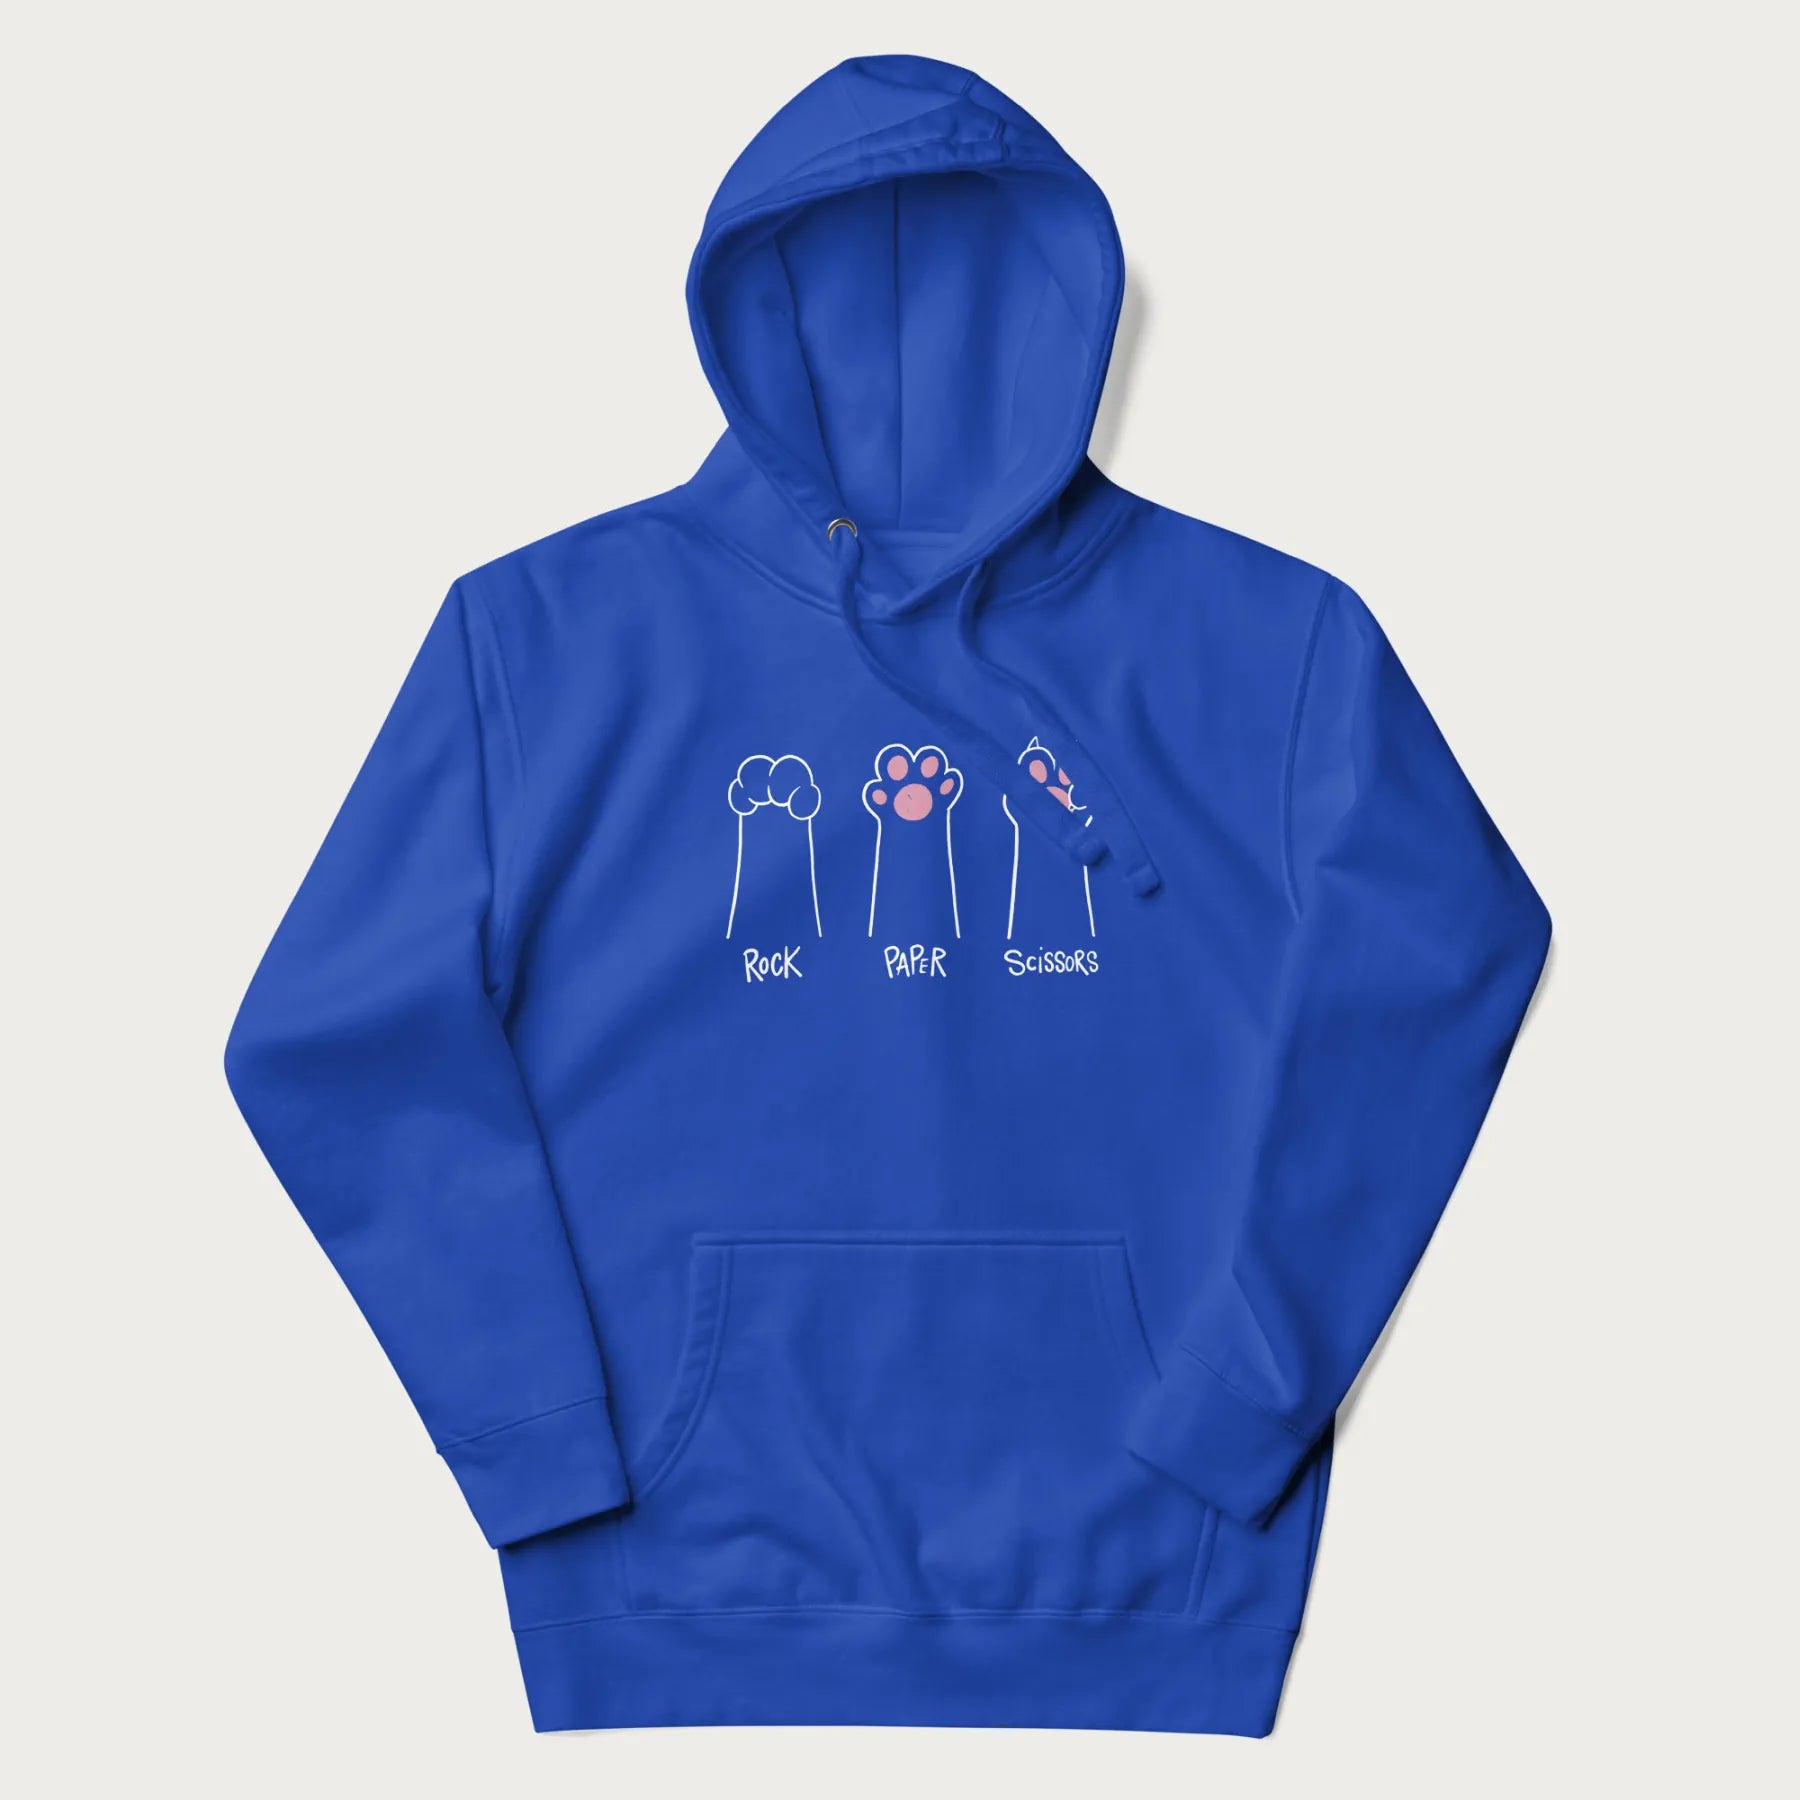 Royal blue hoodie with graphic of cat paws playing rock-paper-scissors.